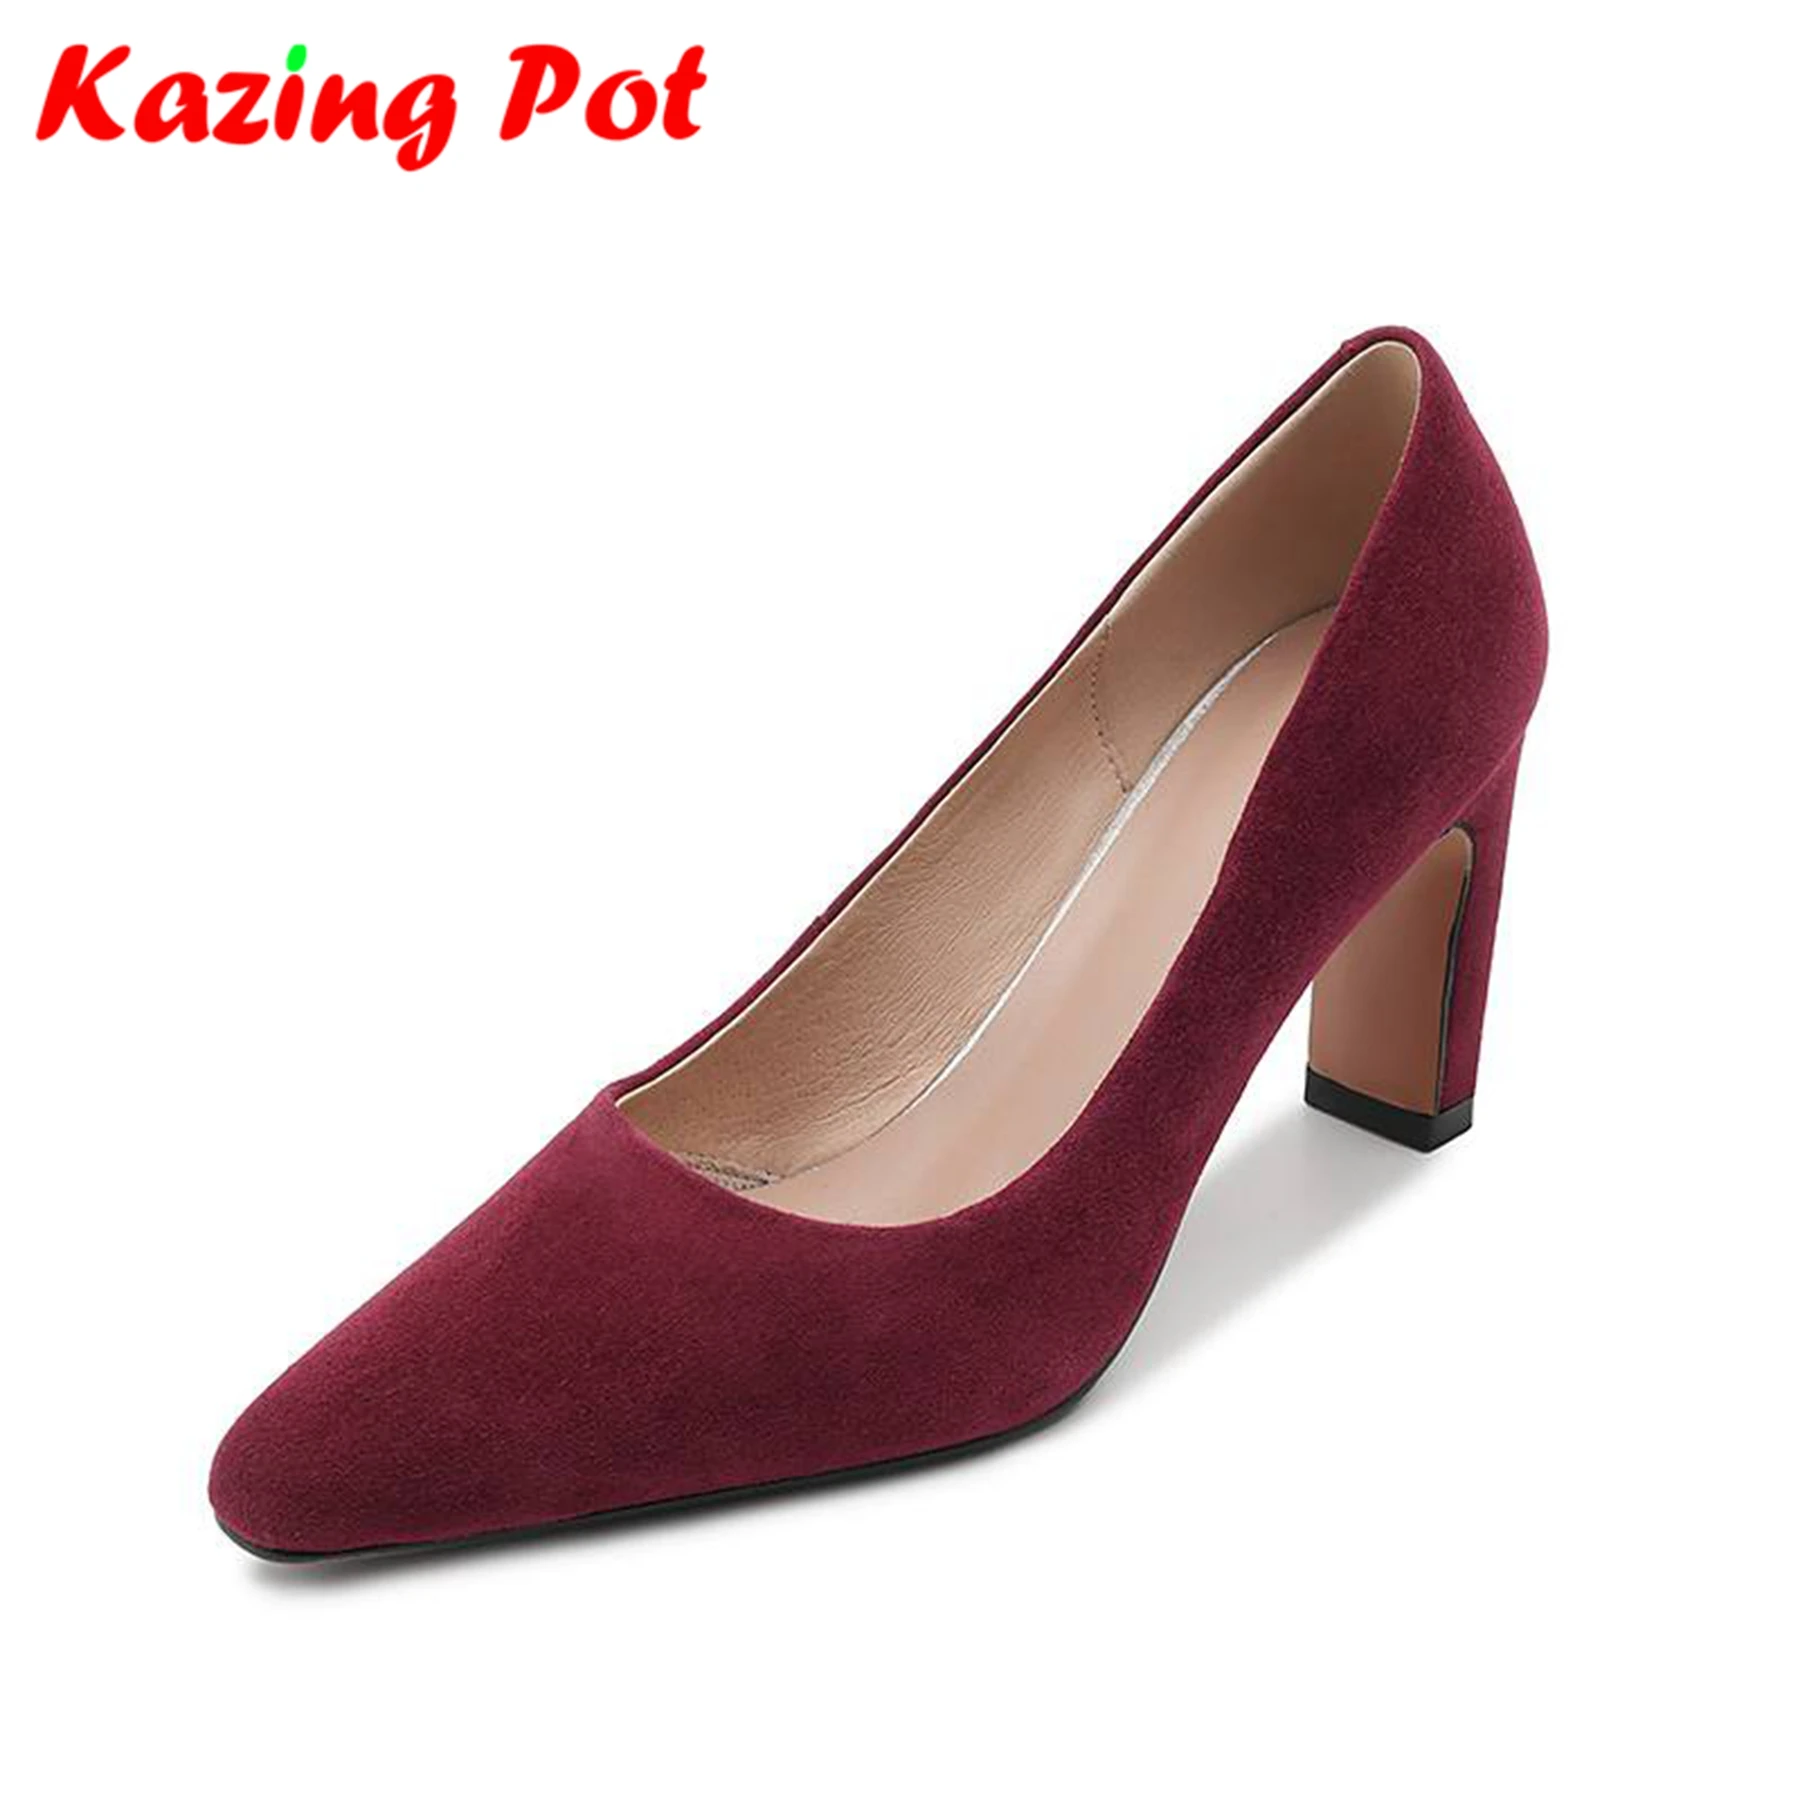 

Krazing Pot Sheep Suede Thick High Heels Pointed Toe European Design Concise Style Women Dating Mature Daily Wear Shallow Pumps